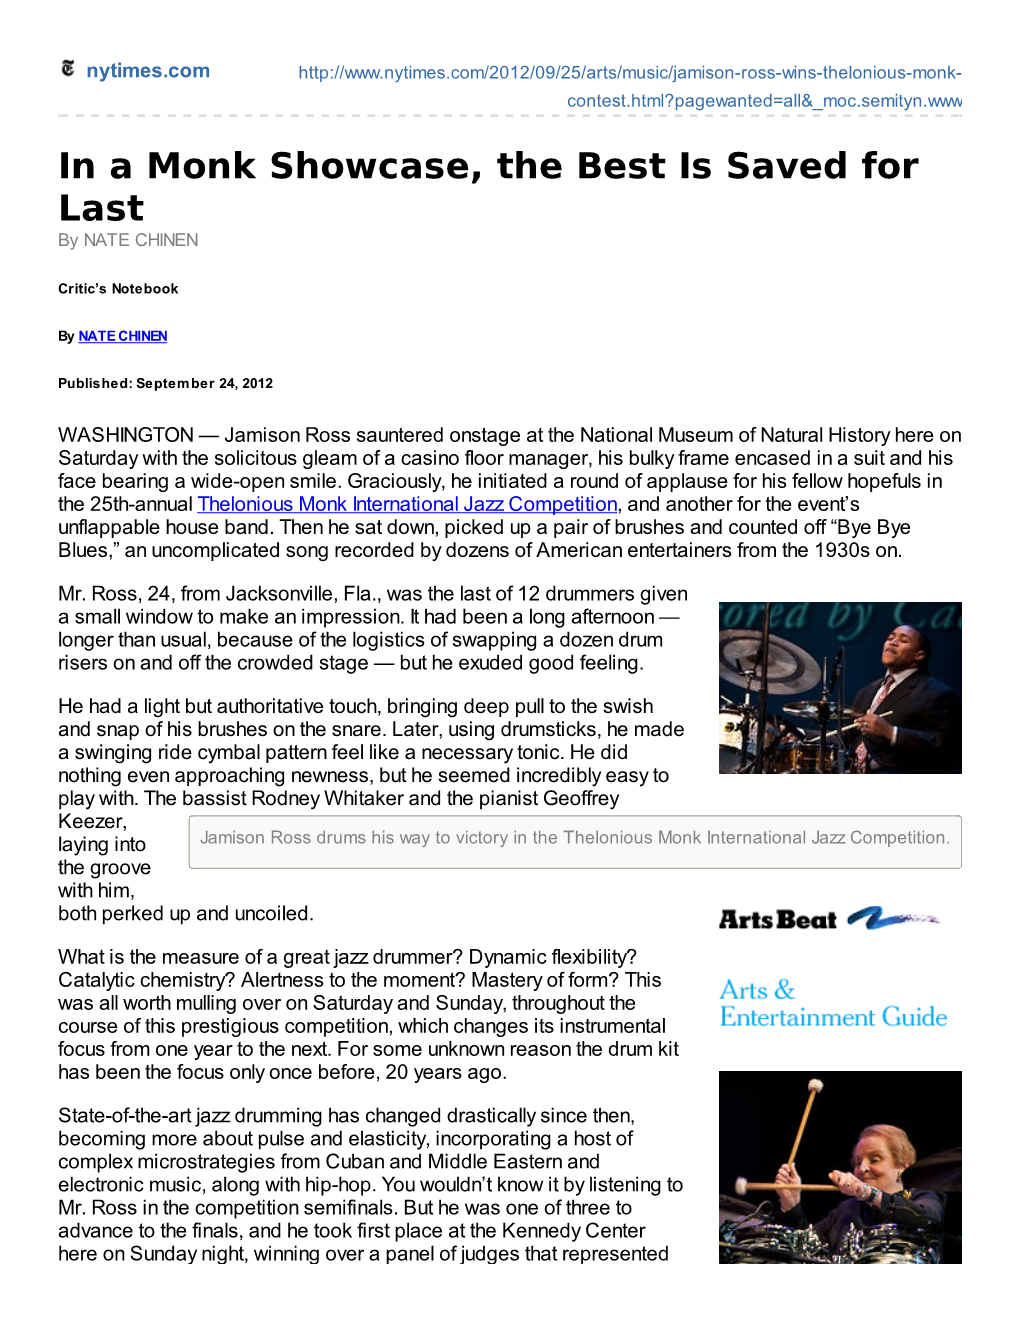 In a Monk Showcase, the Best Is Saved for Last by NATE CHINEN